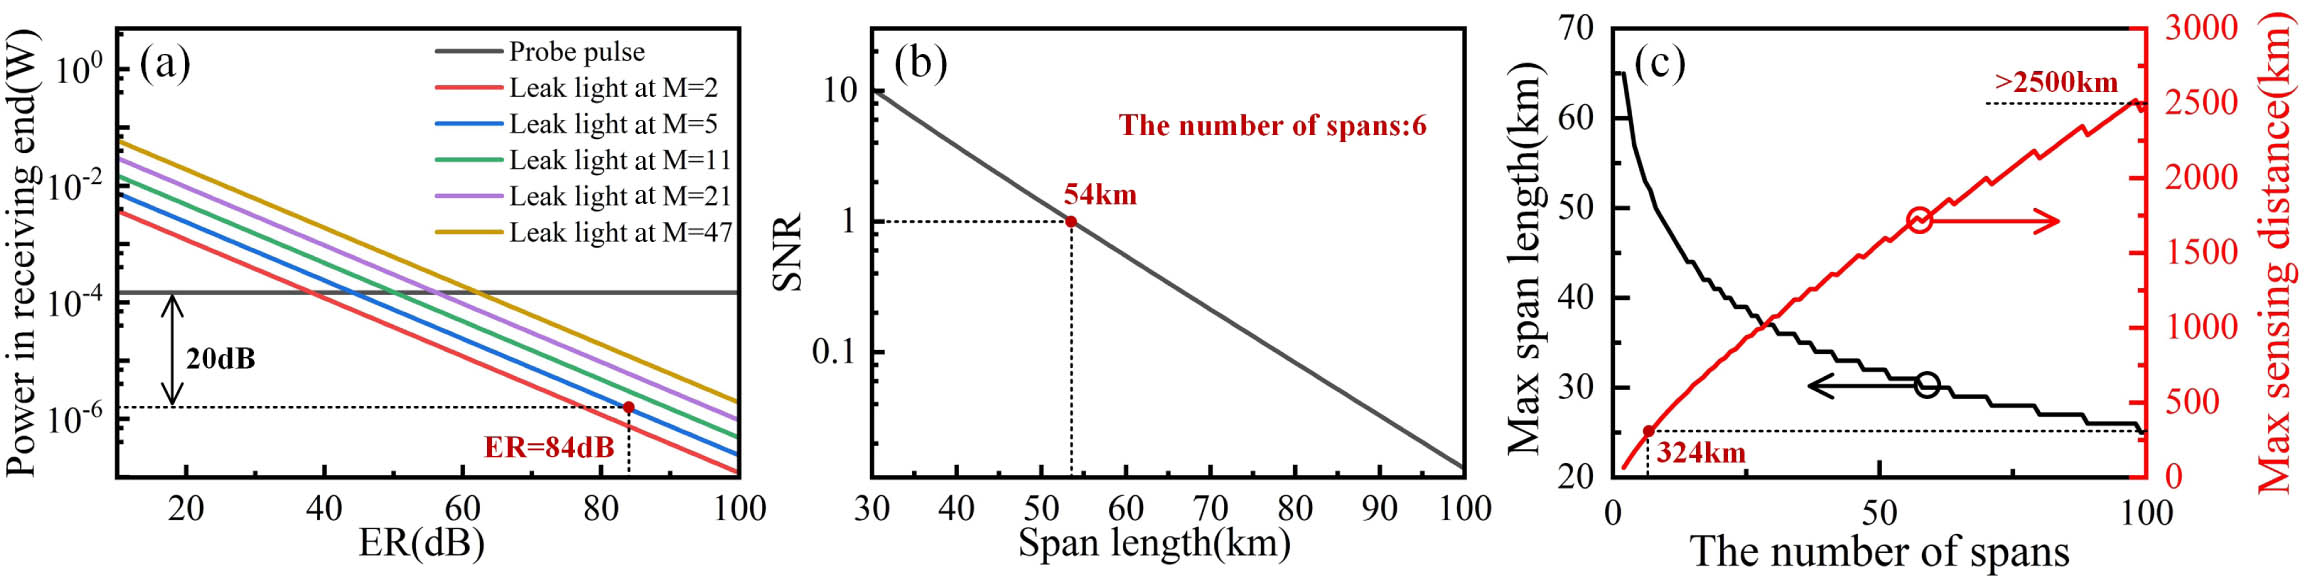 Simulation results. (a) Signal and light leakage power in receiving end with different ER. (b) Power ratio of signal from span end and ASE noise of EDFA with different span length. (c) Maximum span length and maximum sensing distance with different span numbers.